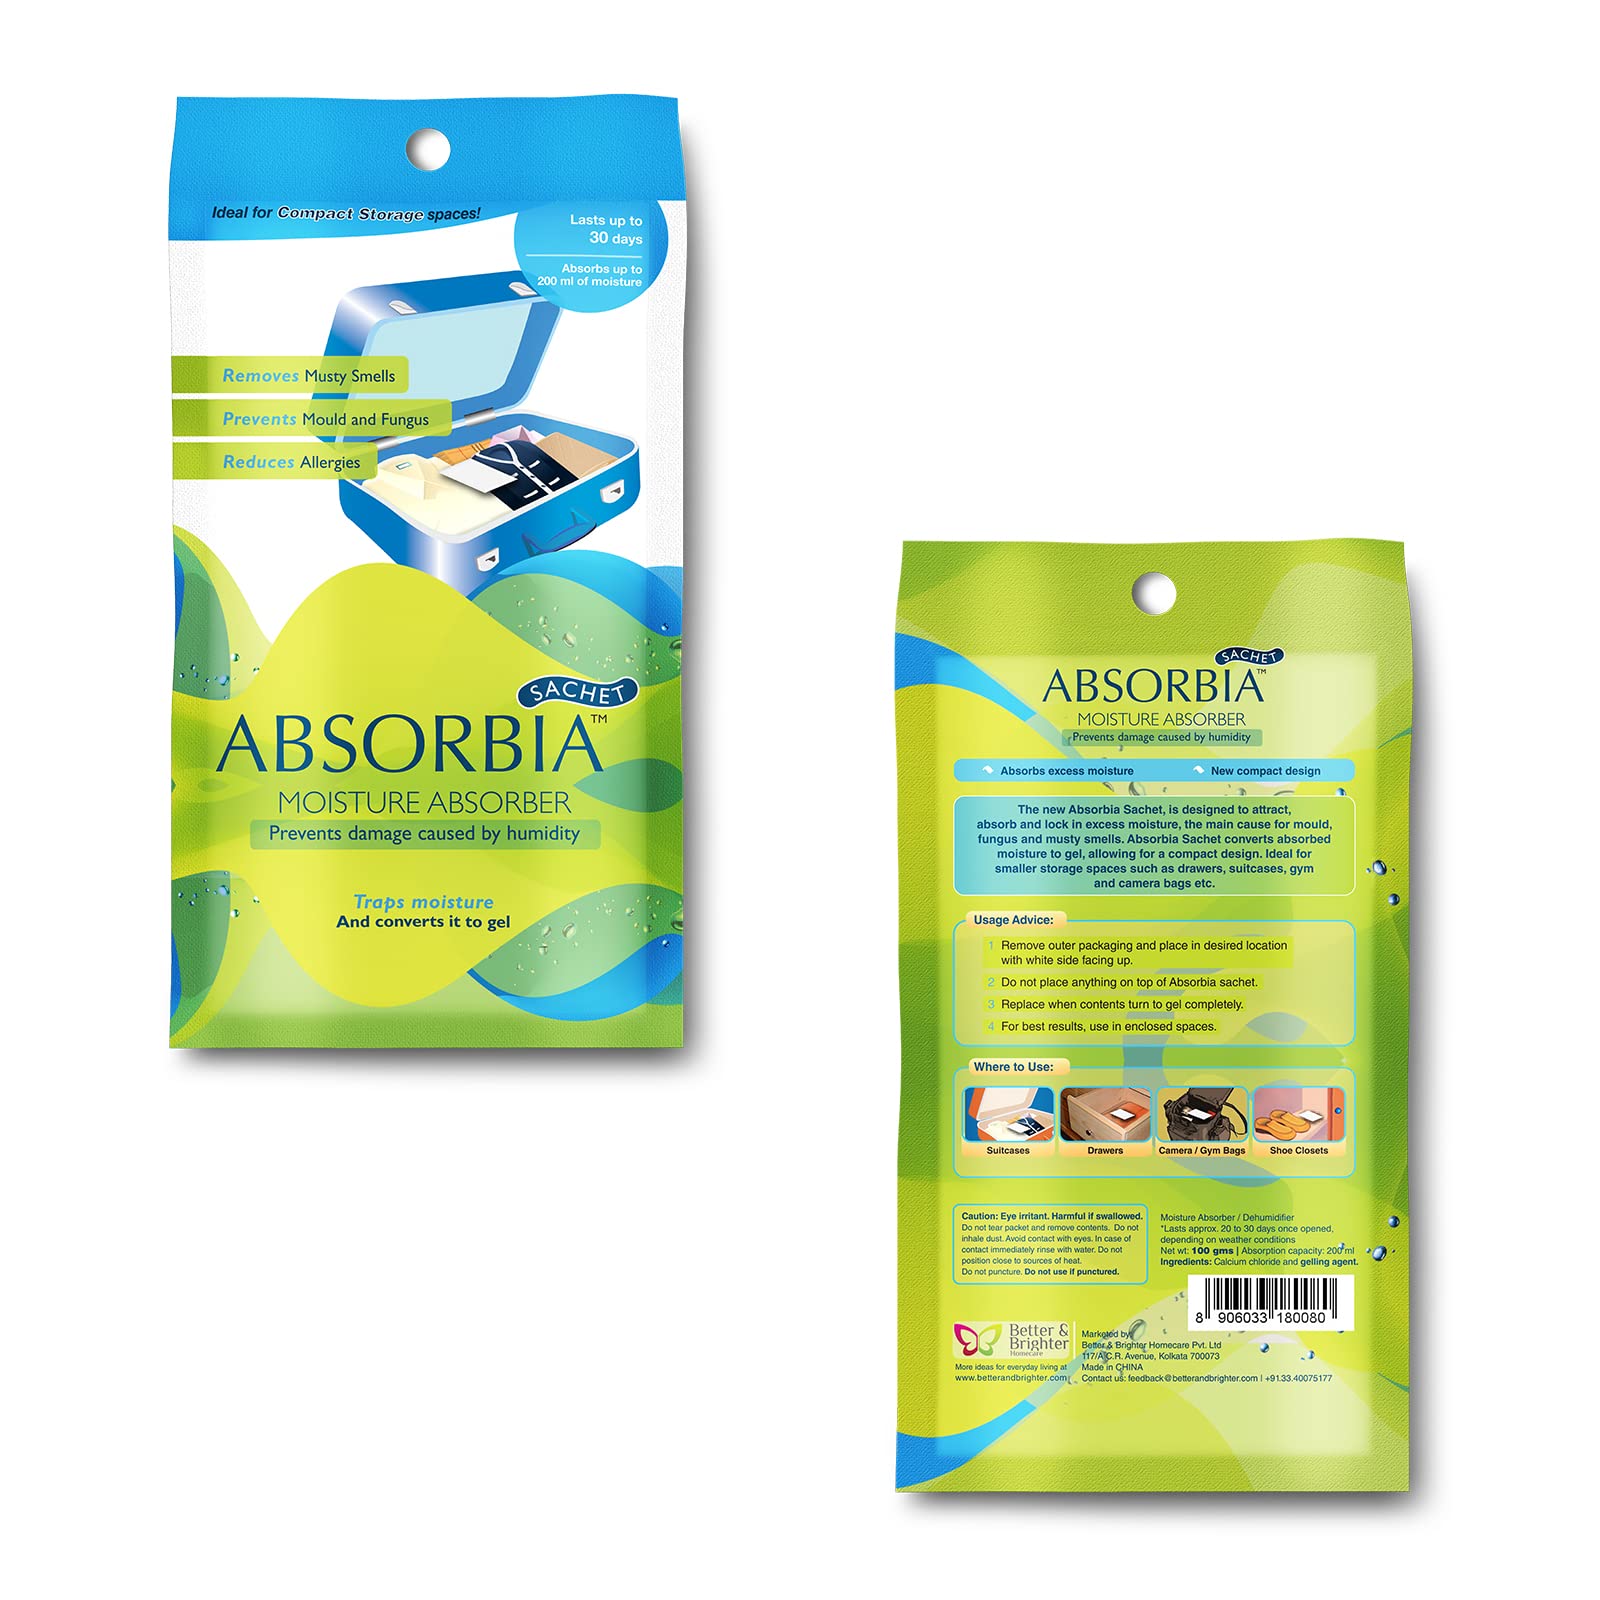 Absorbia Moisture Absorber Odour Buster with Activated Charcoal Pack of 6(300g each)|Absorbia Sachet - Pack of 6 (100g each) | Dehumidifier for Wardrobe, Cupboards & Closets